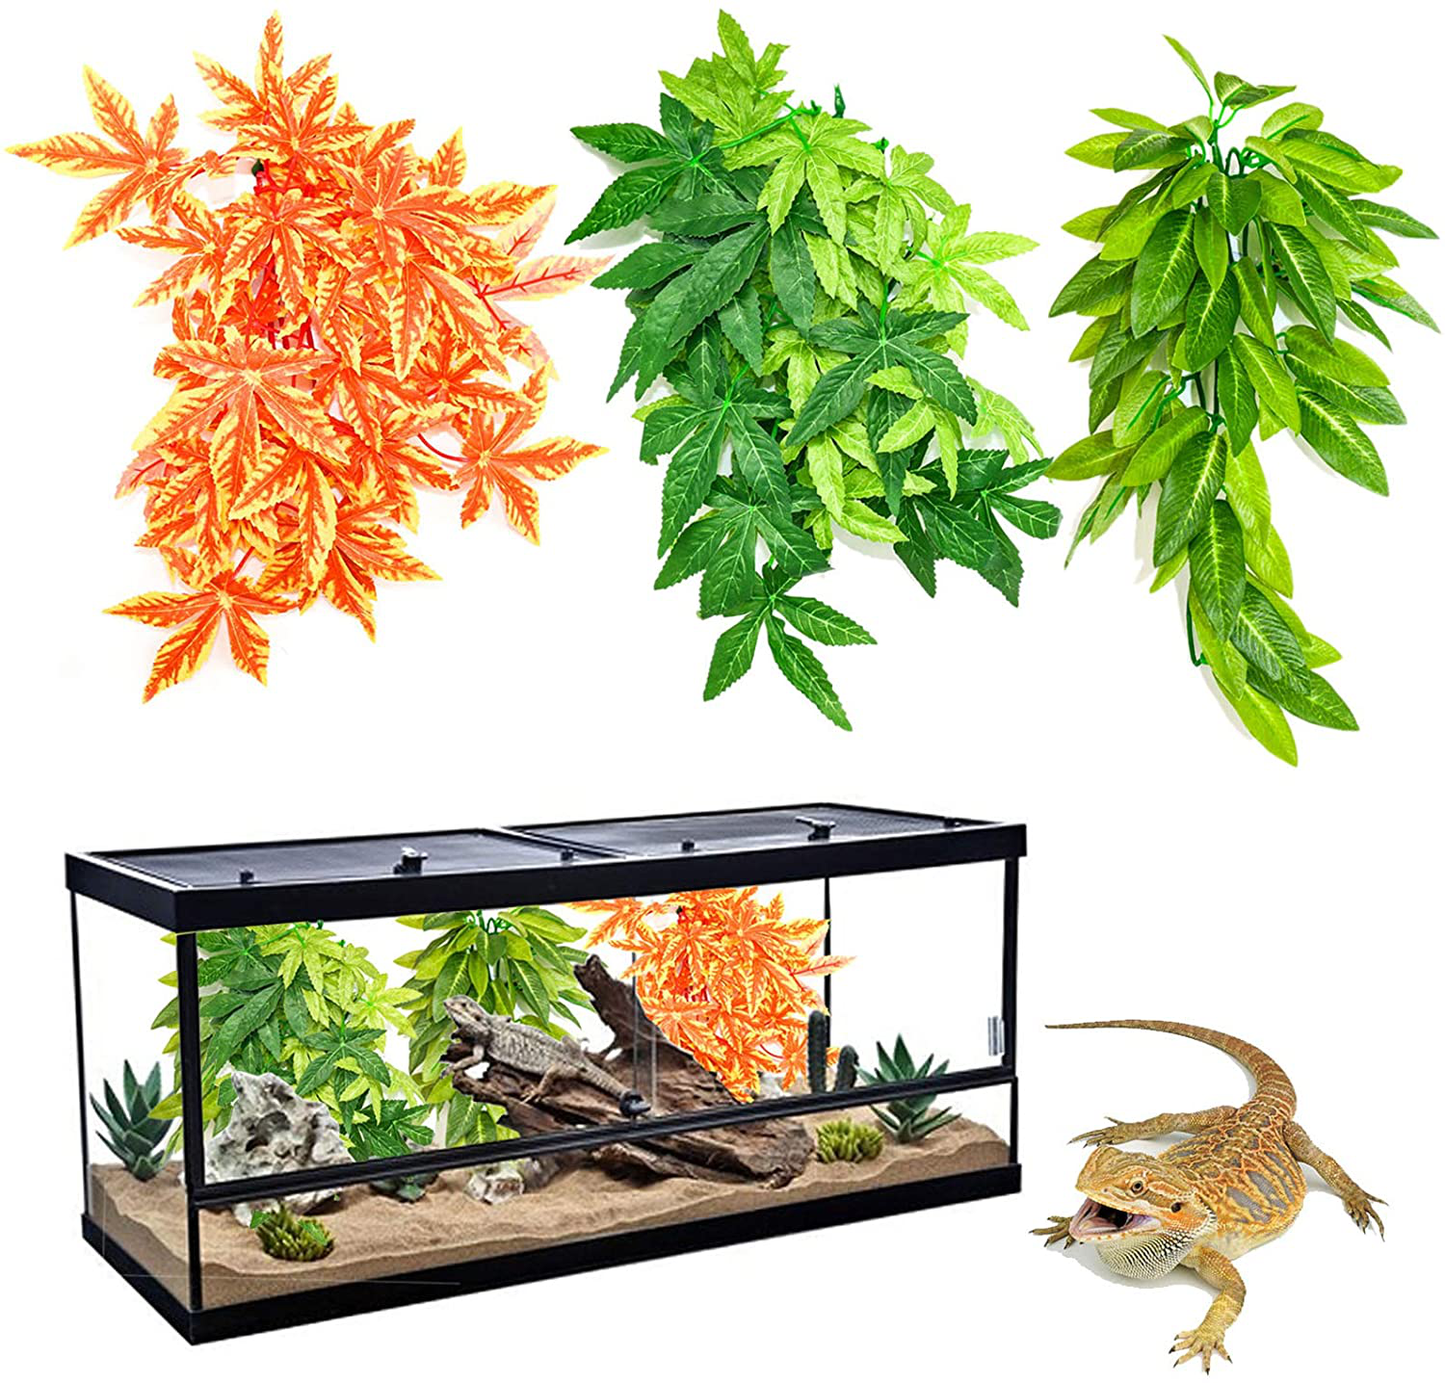 HYLYUN 3 Pack Reptile Plants - Hanging Silk Terrarium Plant with Suction Cup for Bearded Dragons Lizards Geckos Snake Hermit Crab Tank Habitat Decorations